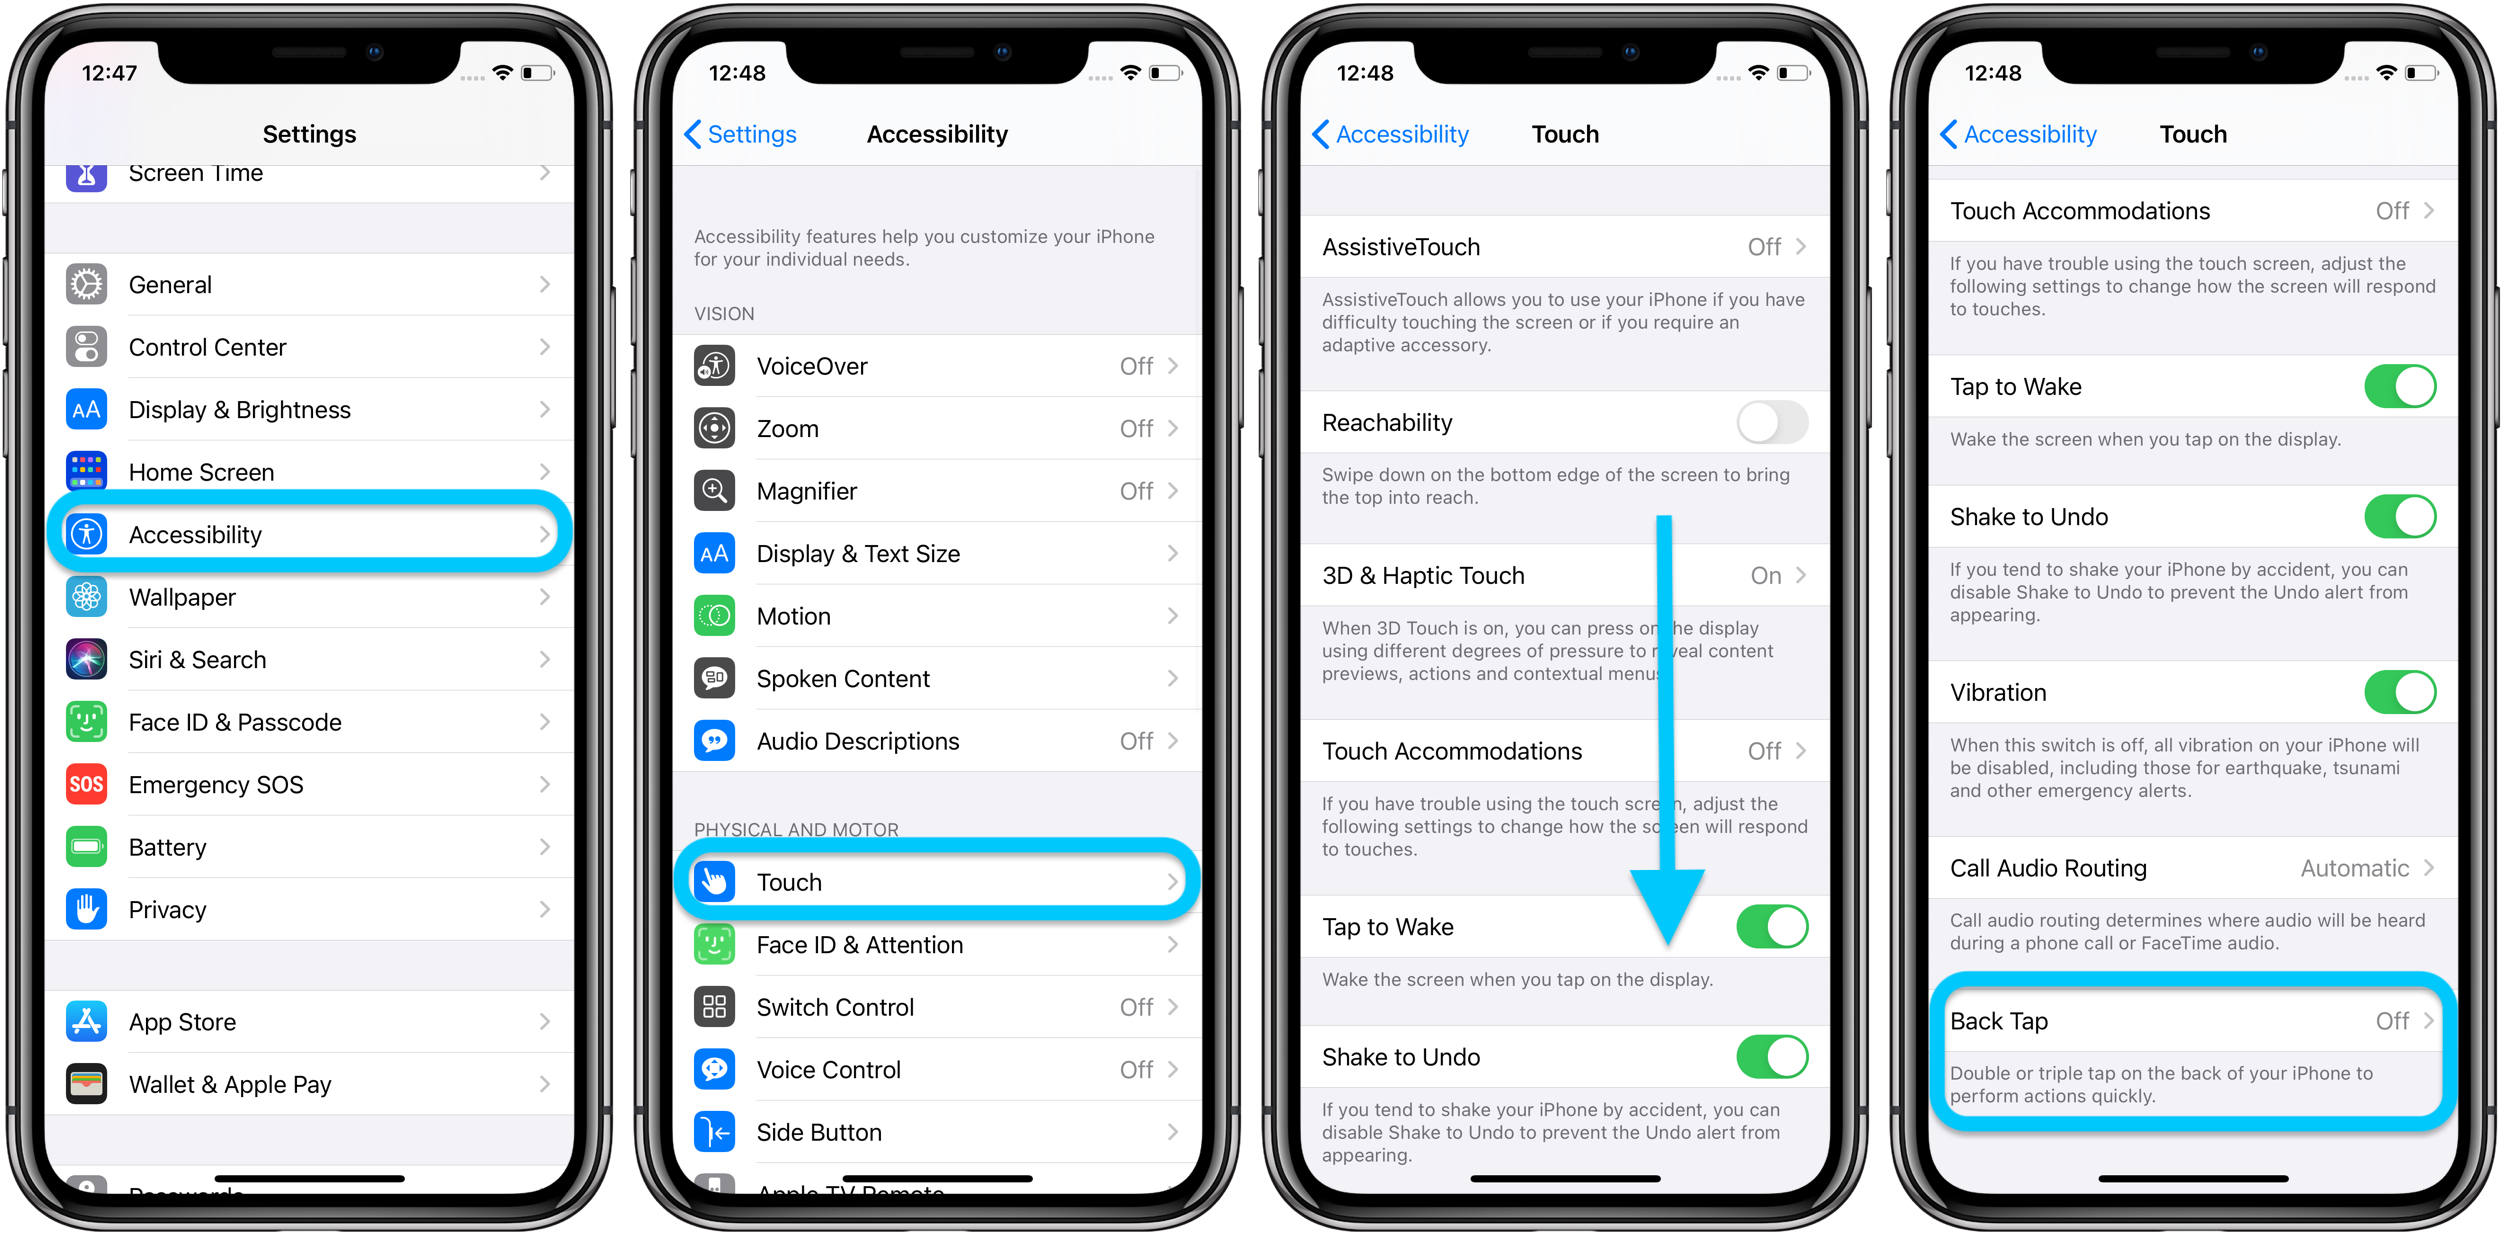 How to use iPhone Back Tap custom controls